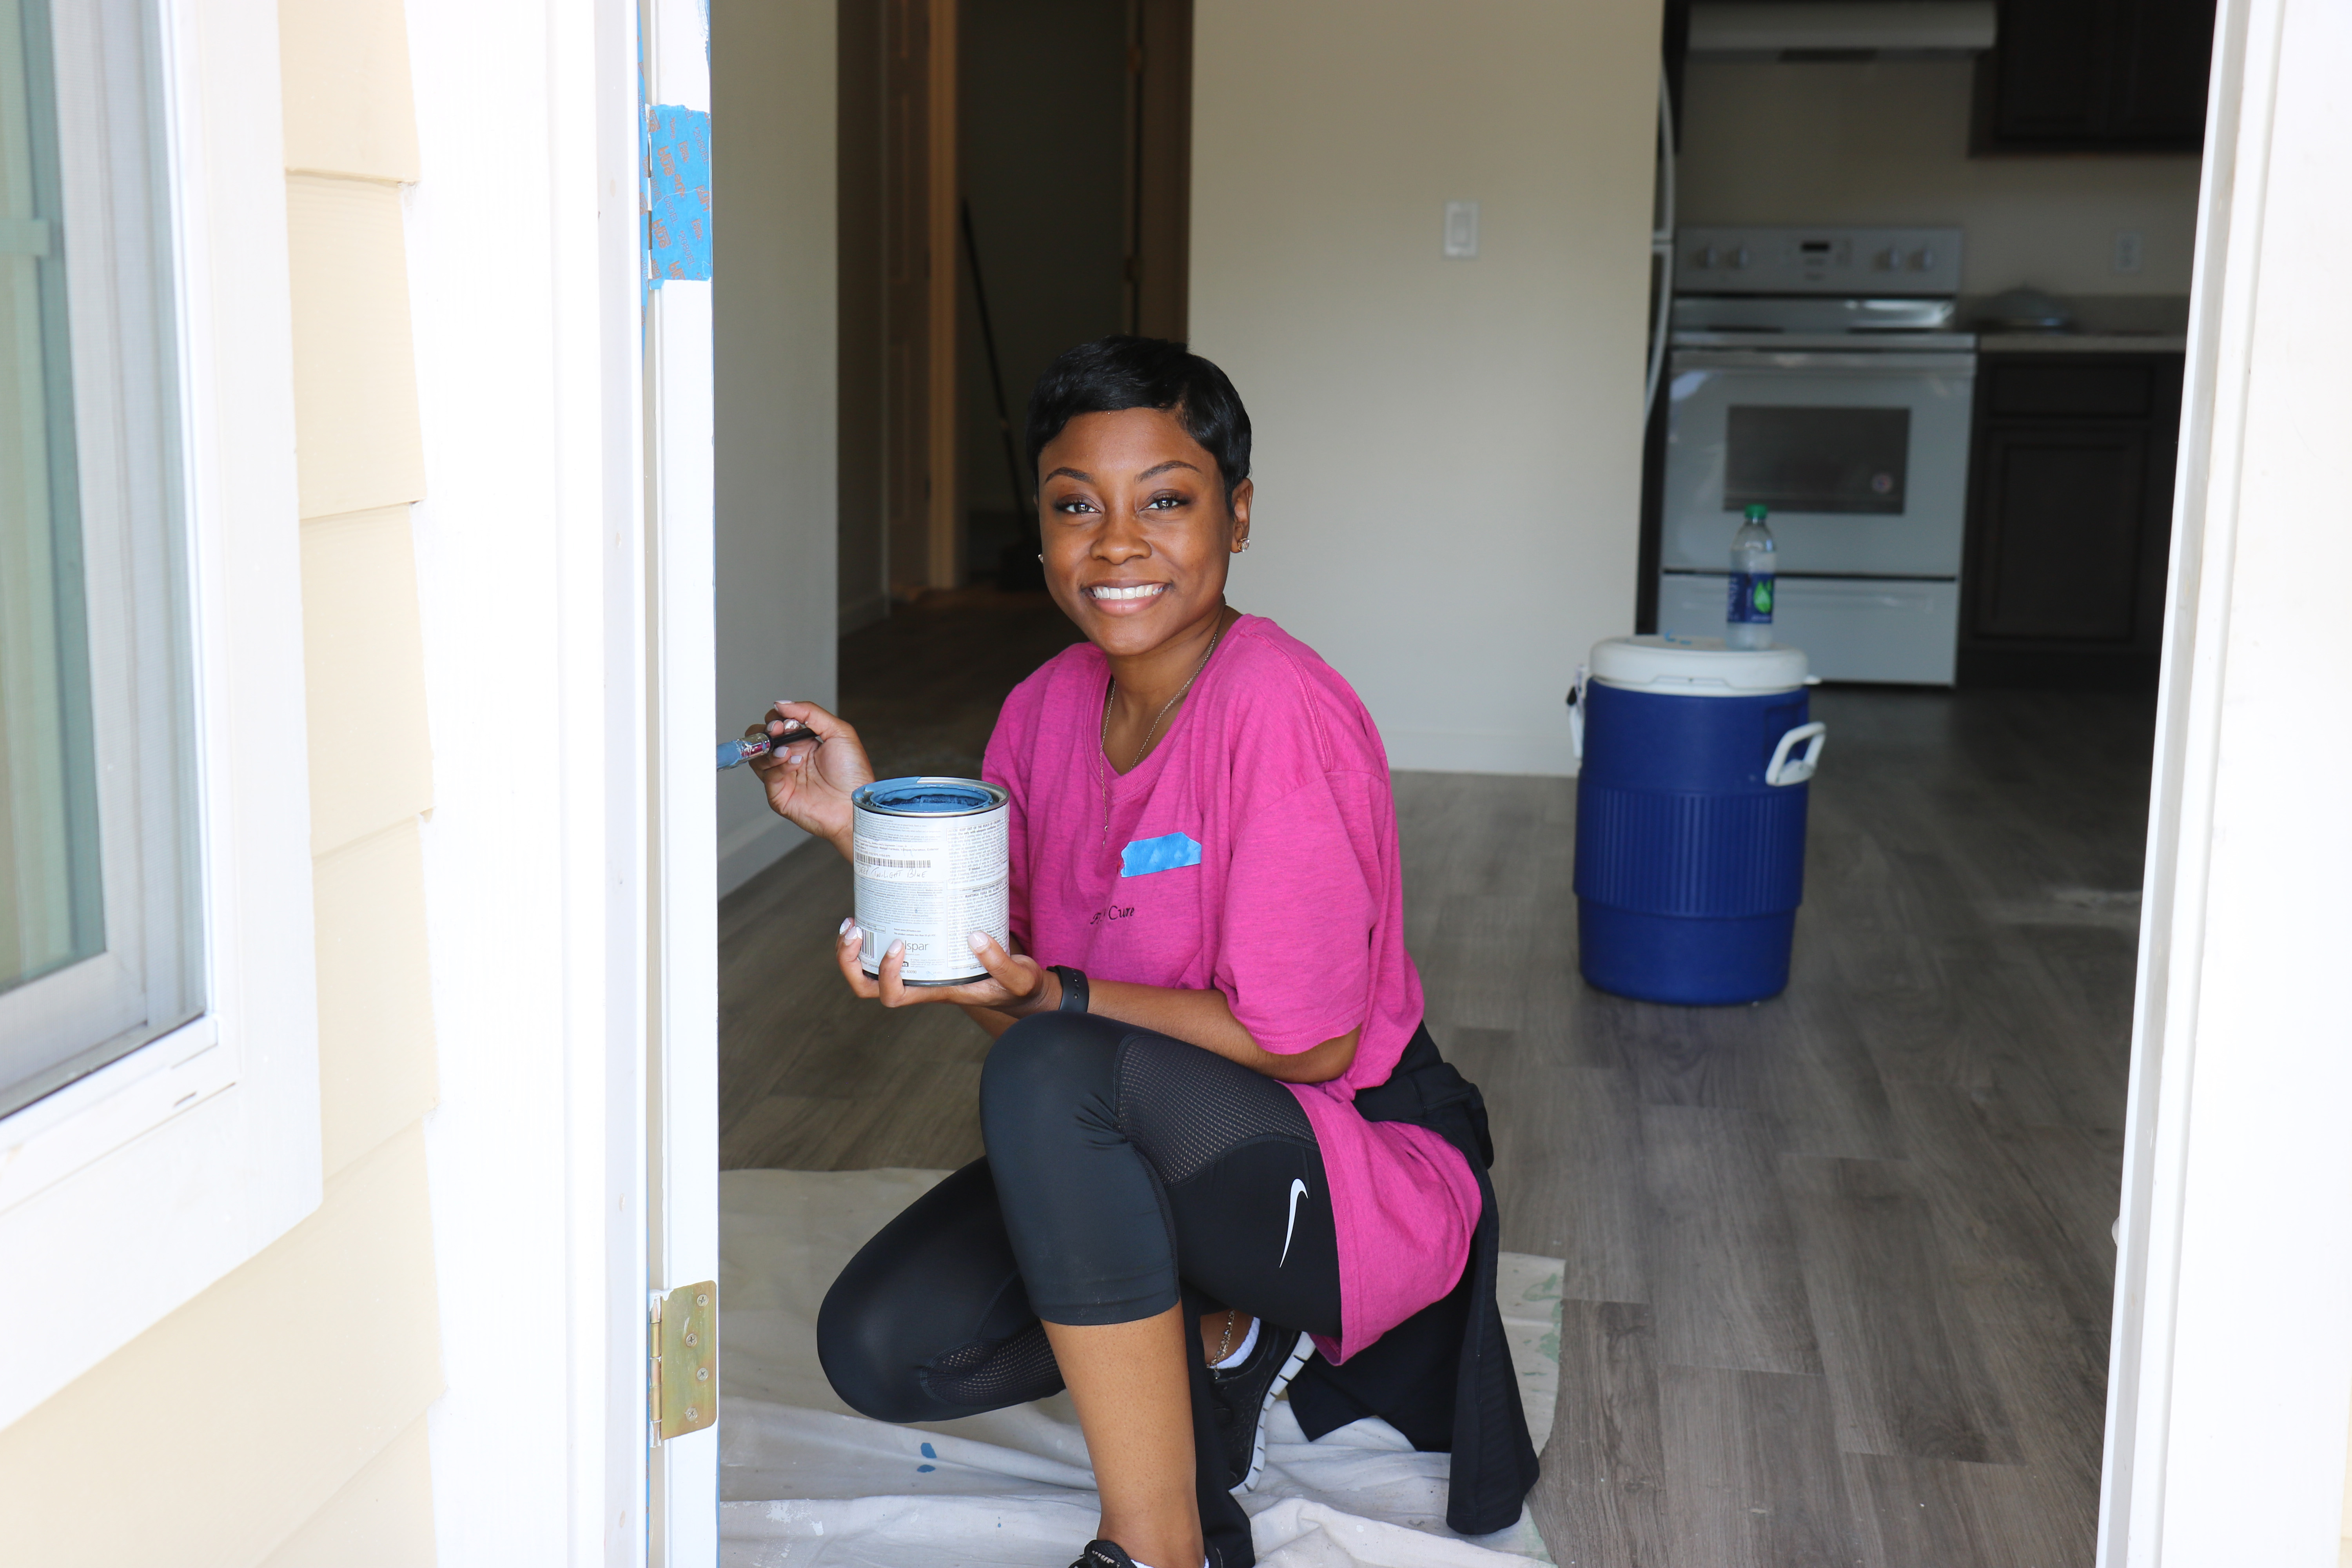 Smiling volunteer painting interior door frame with blue cooler and kitchen in background